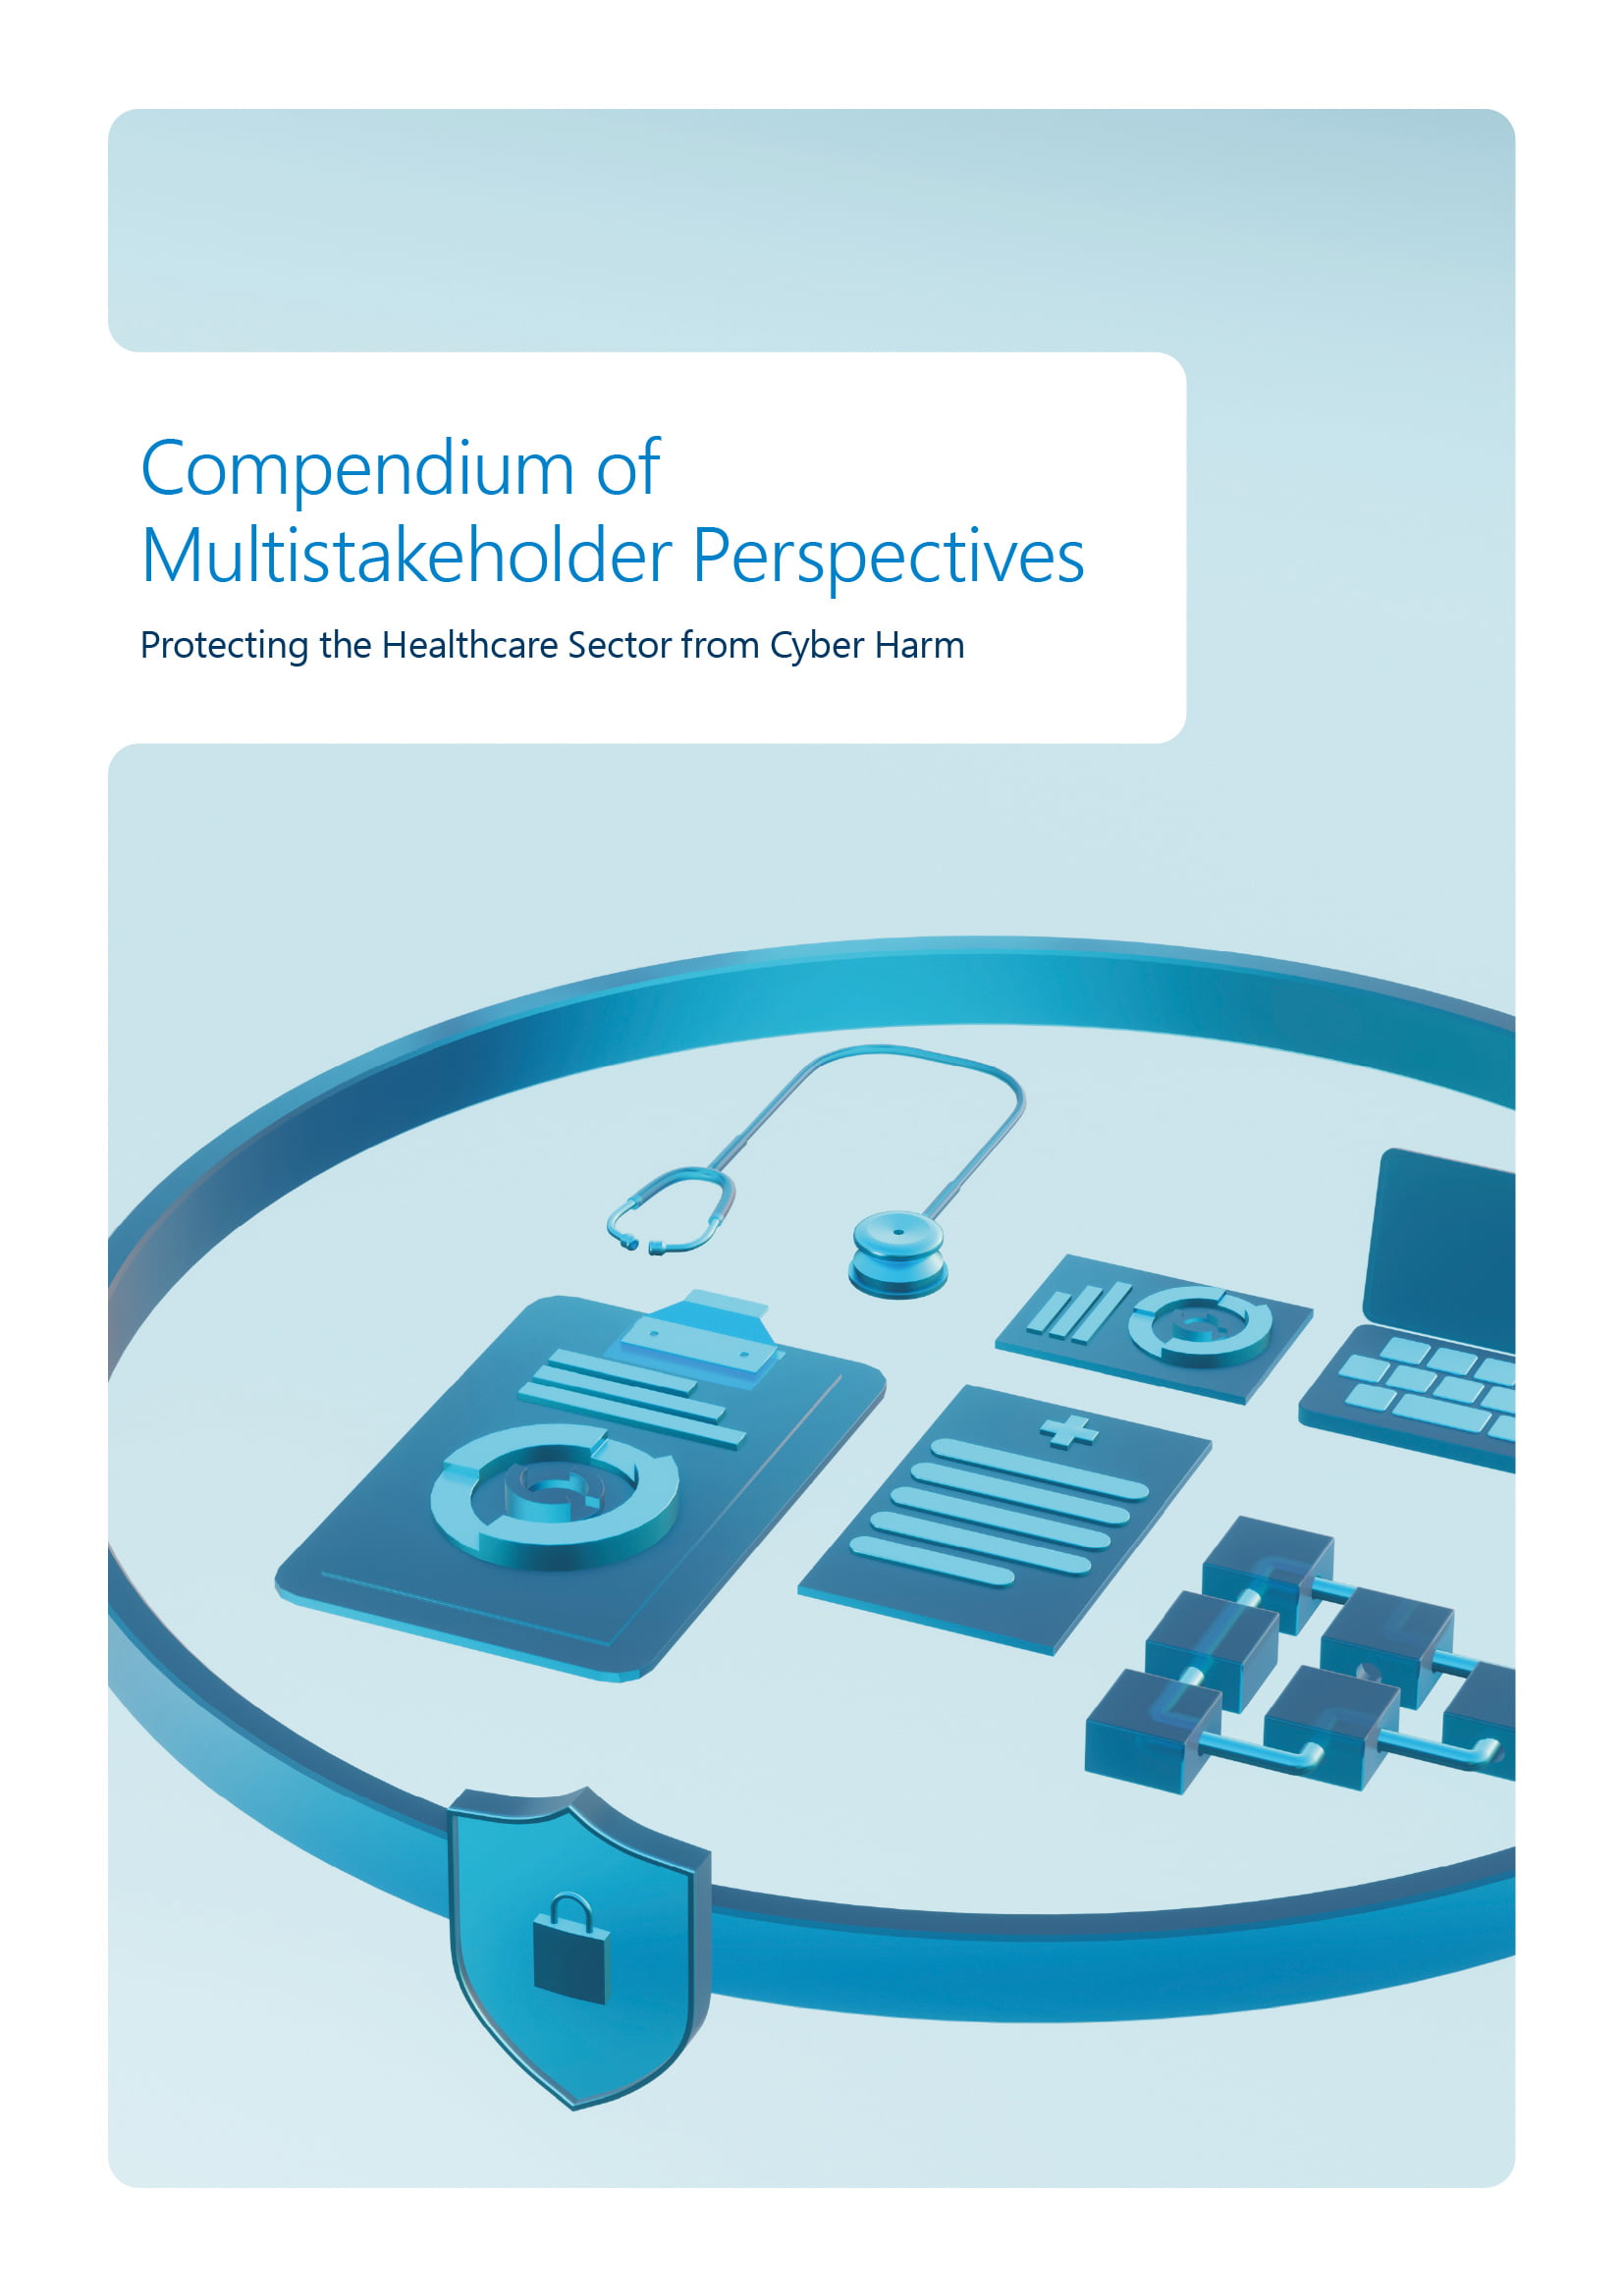 Compendium of Multistakeholder Perspectives